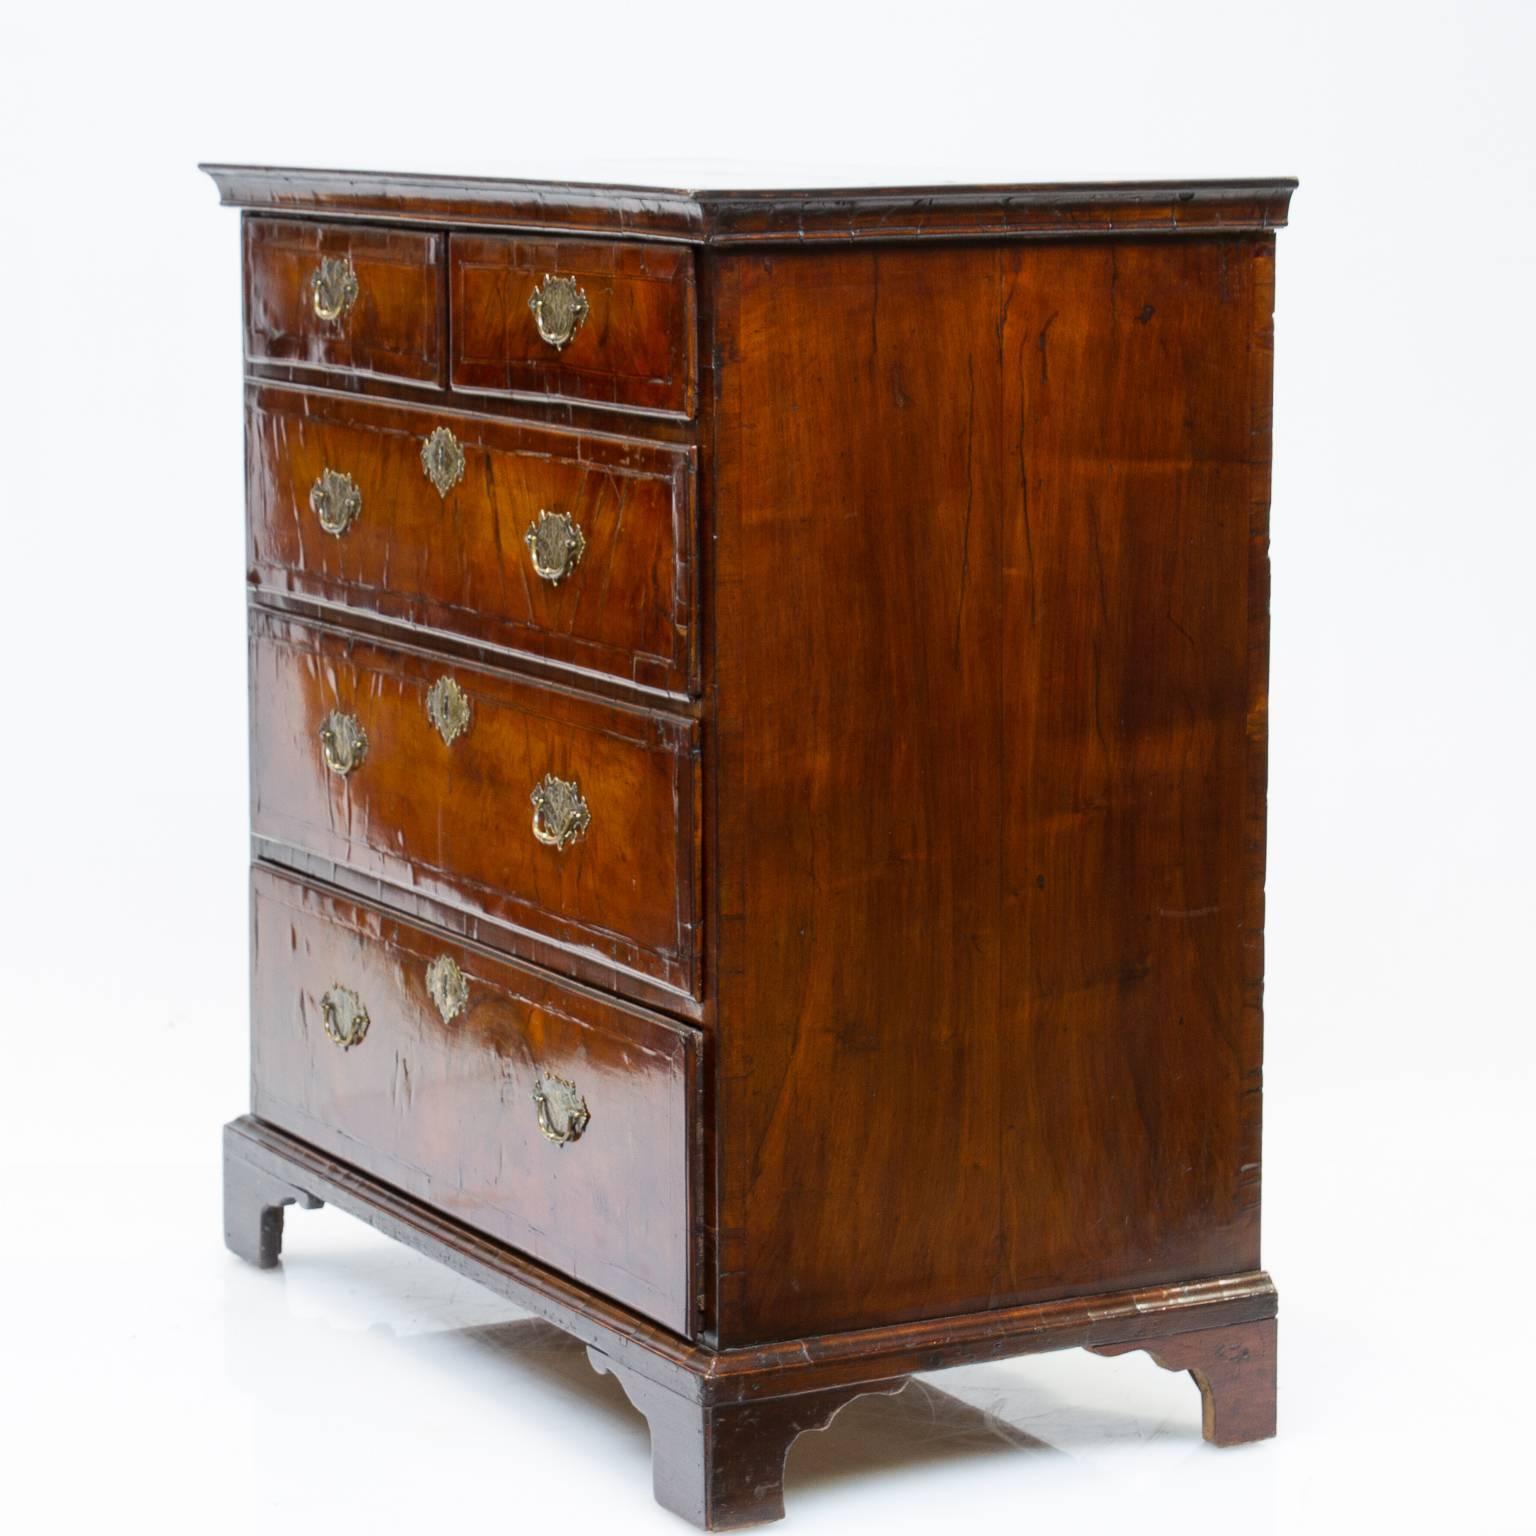 18th century Queen Anne walnut two over three chest of drawers. This chest of drawers has an amazing front, first the French polish is amazing and highlights the thick cut of quality veneers. The figured walnut rich in color and depth. You will see